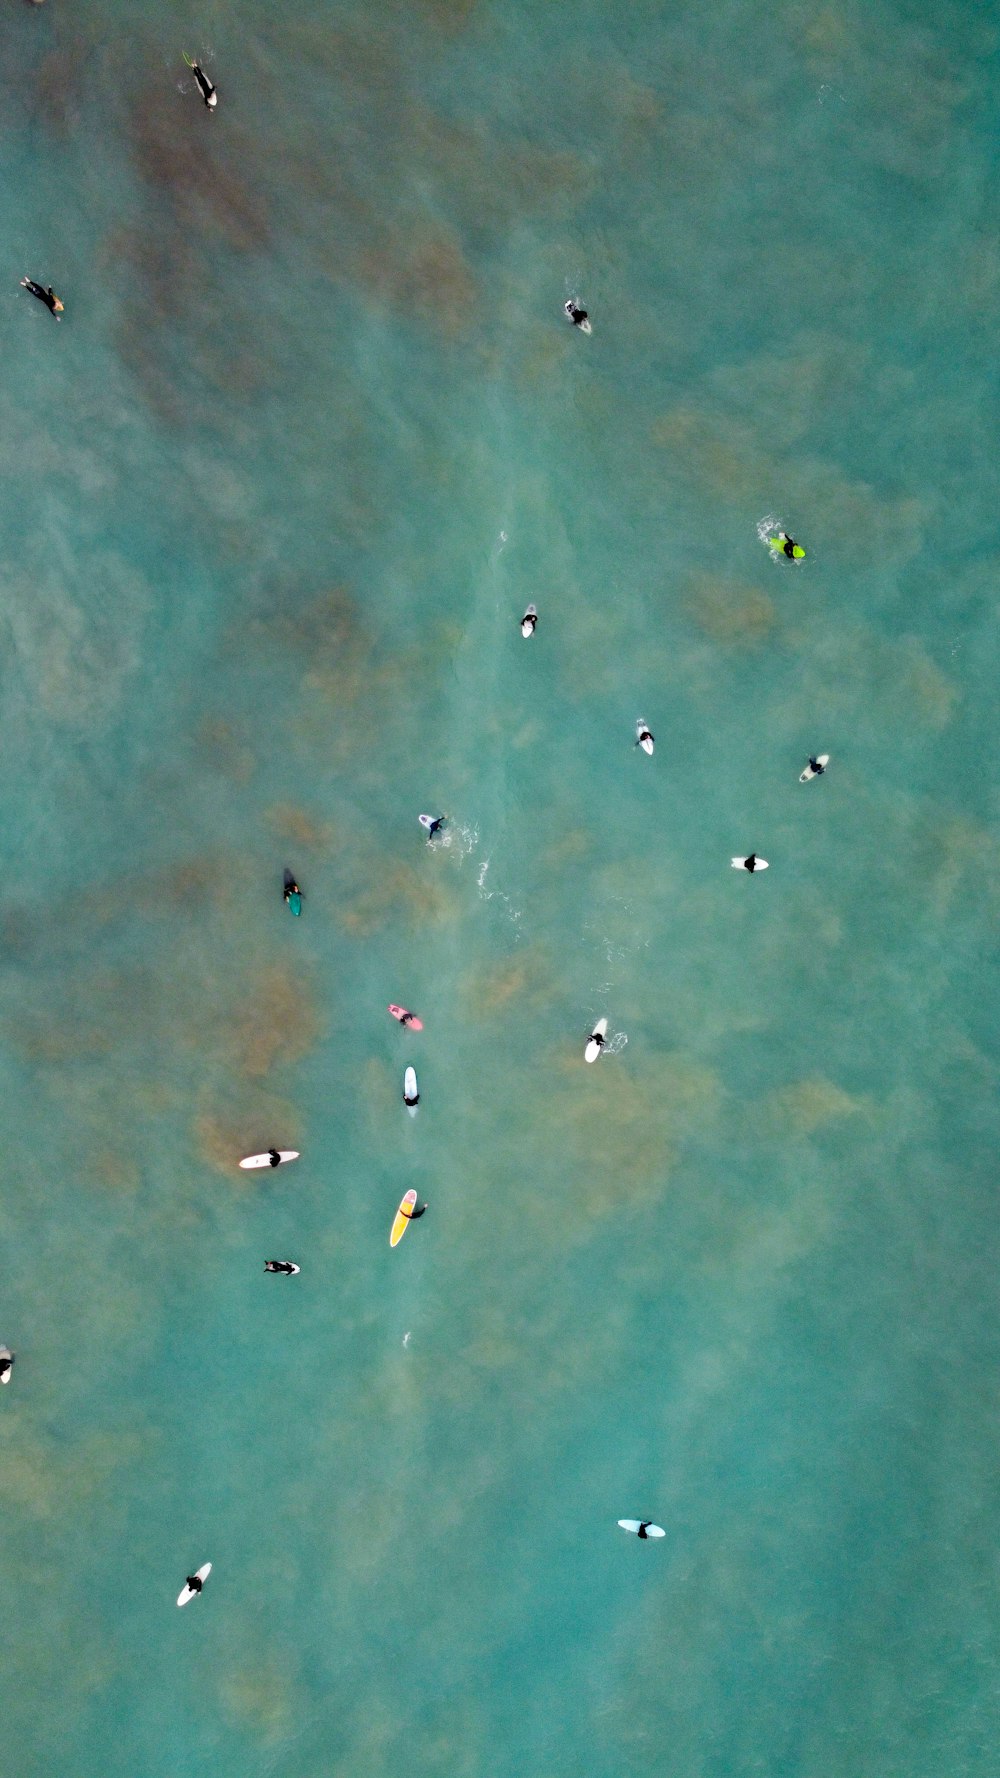 a group of people in the water with surfboards